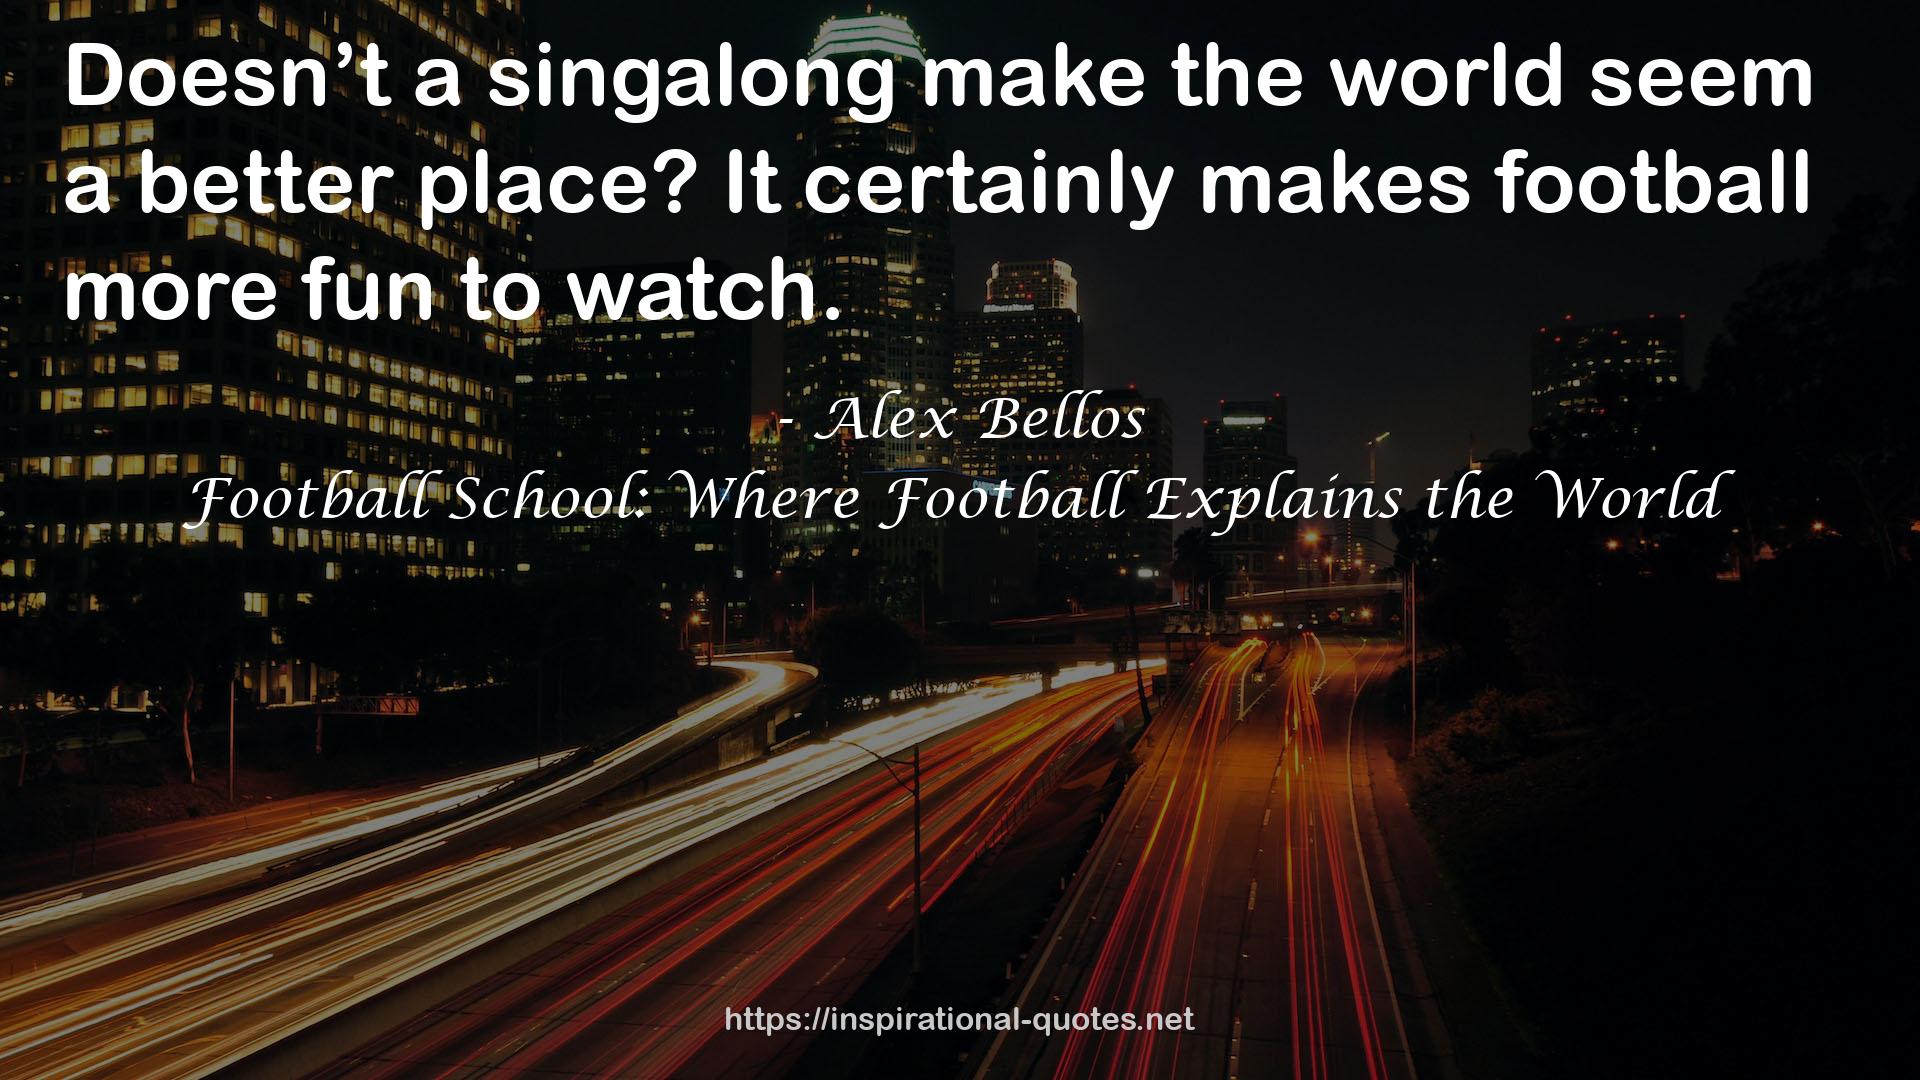 Football School: Where Football Explains the World QUOTES